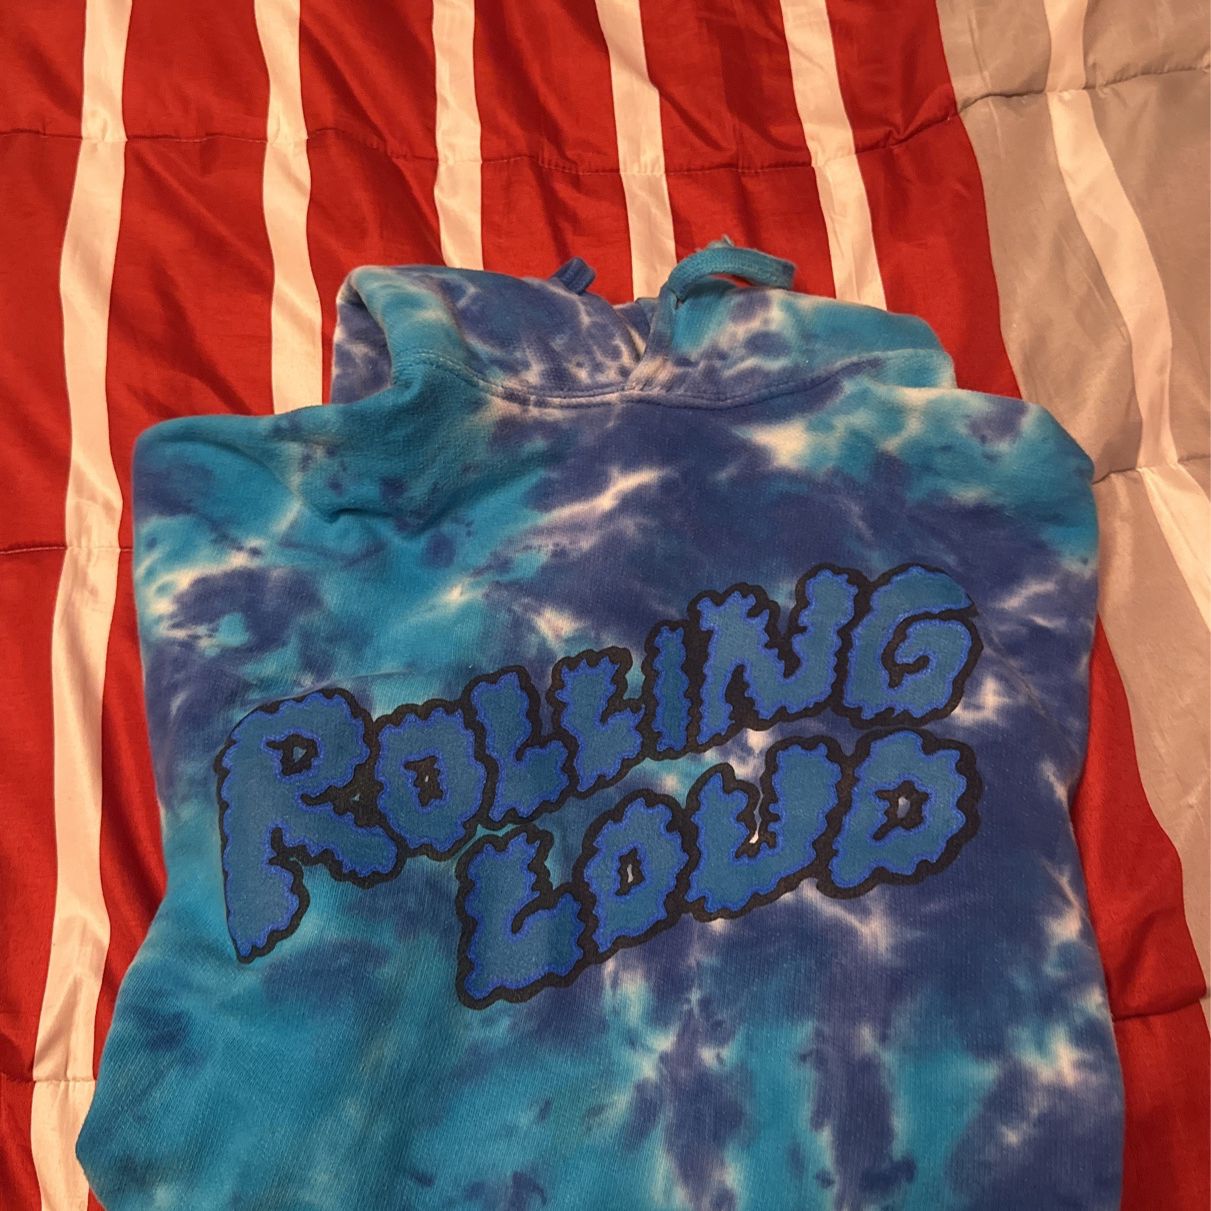 Rolling Loud Miami Hoodie 2022 for Sale in Grnd Vw Hudsn, NY - OfferUp